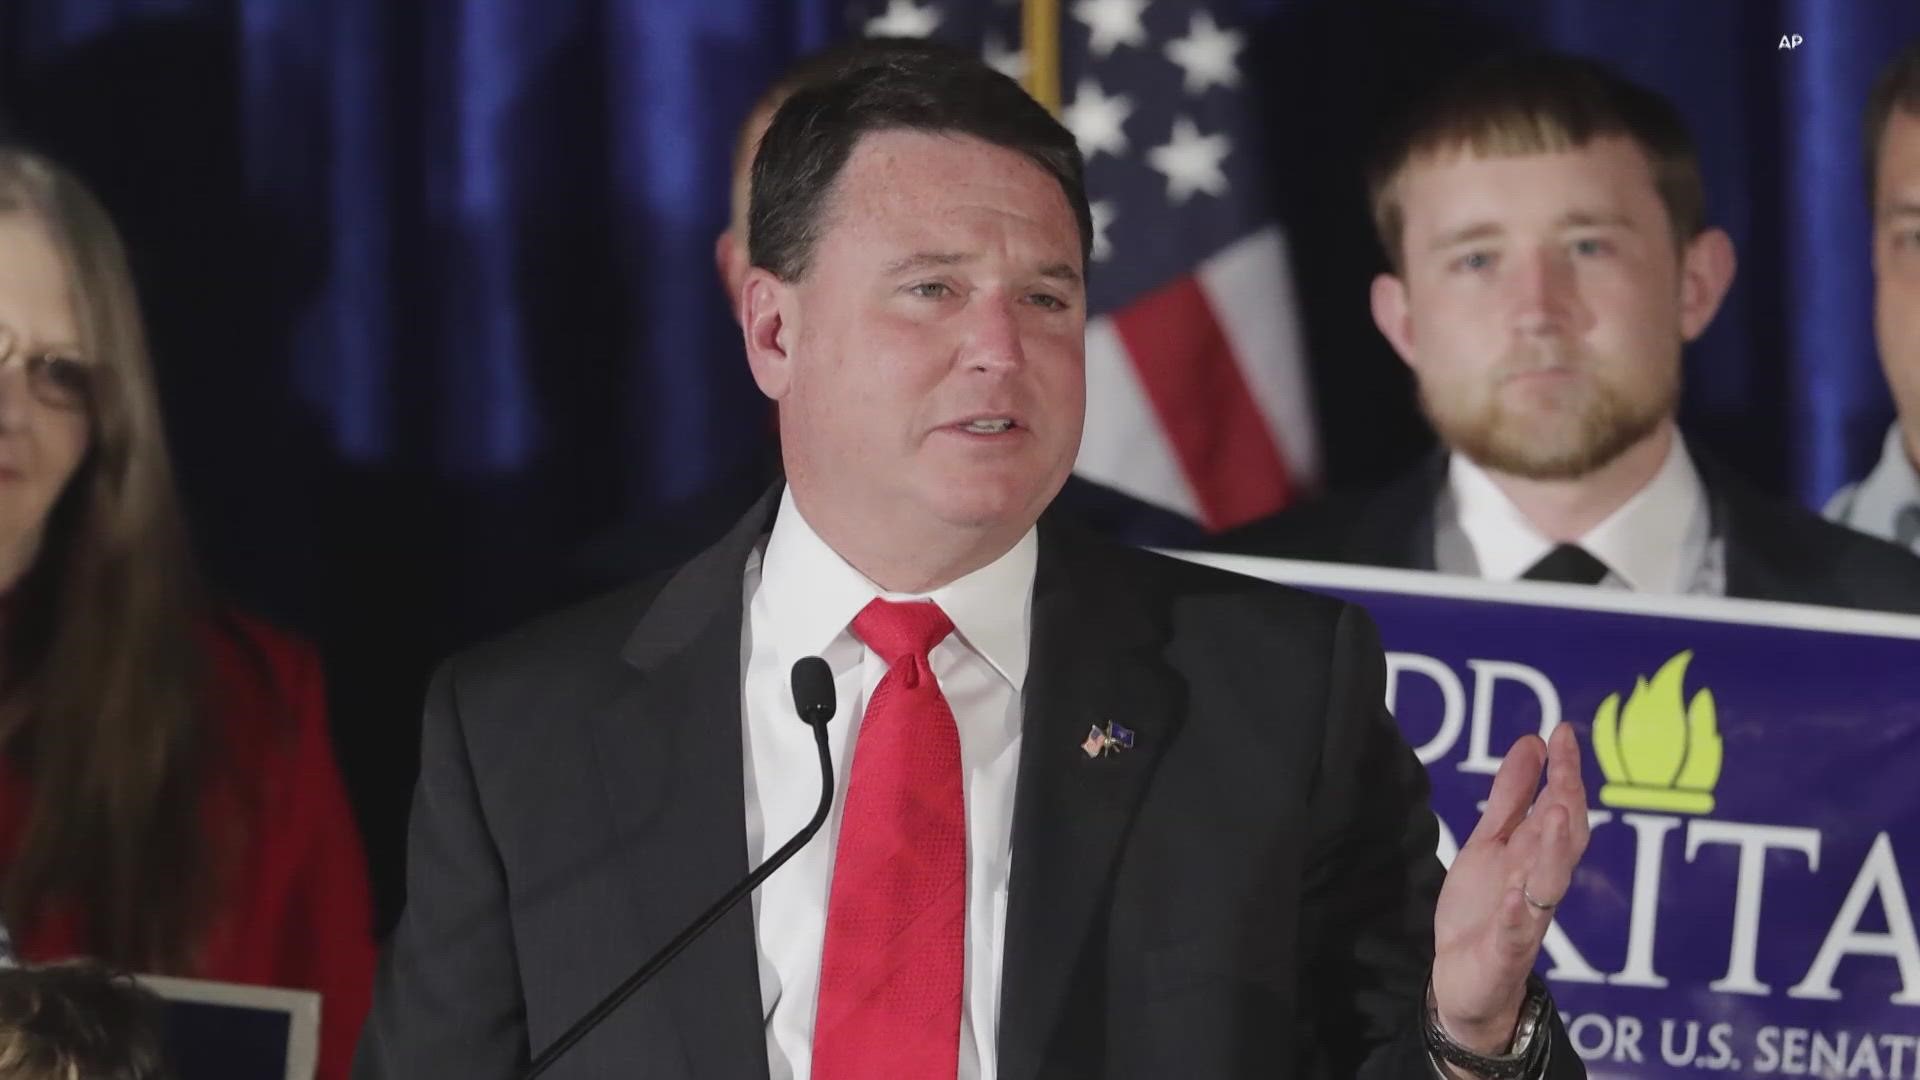 Indiana AG Todd Rokita said he's seeking answers from several medical facilities over allegations of sterilization procedures on transgender children.